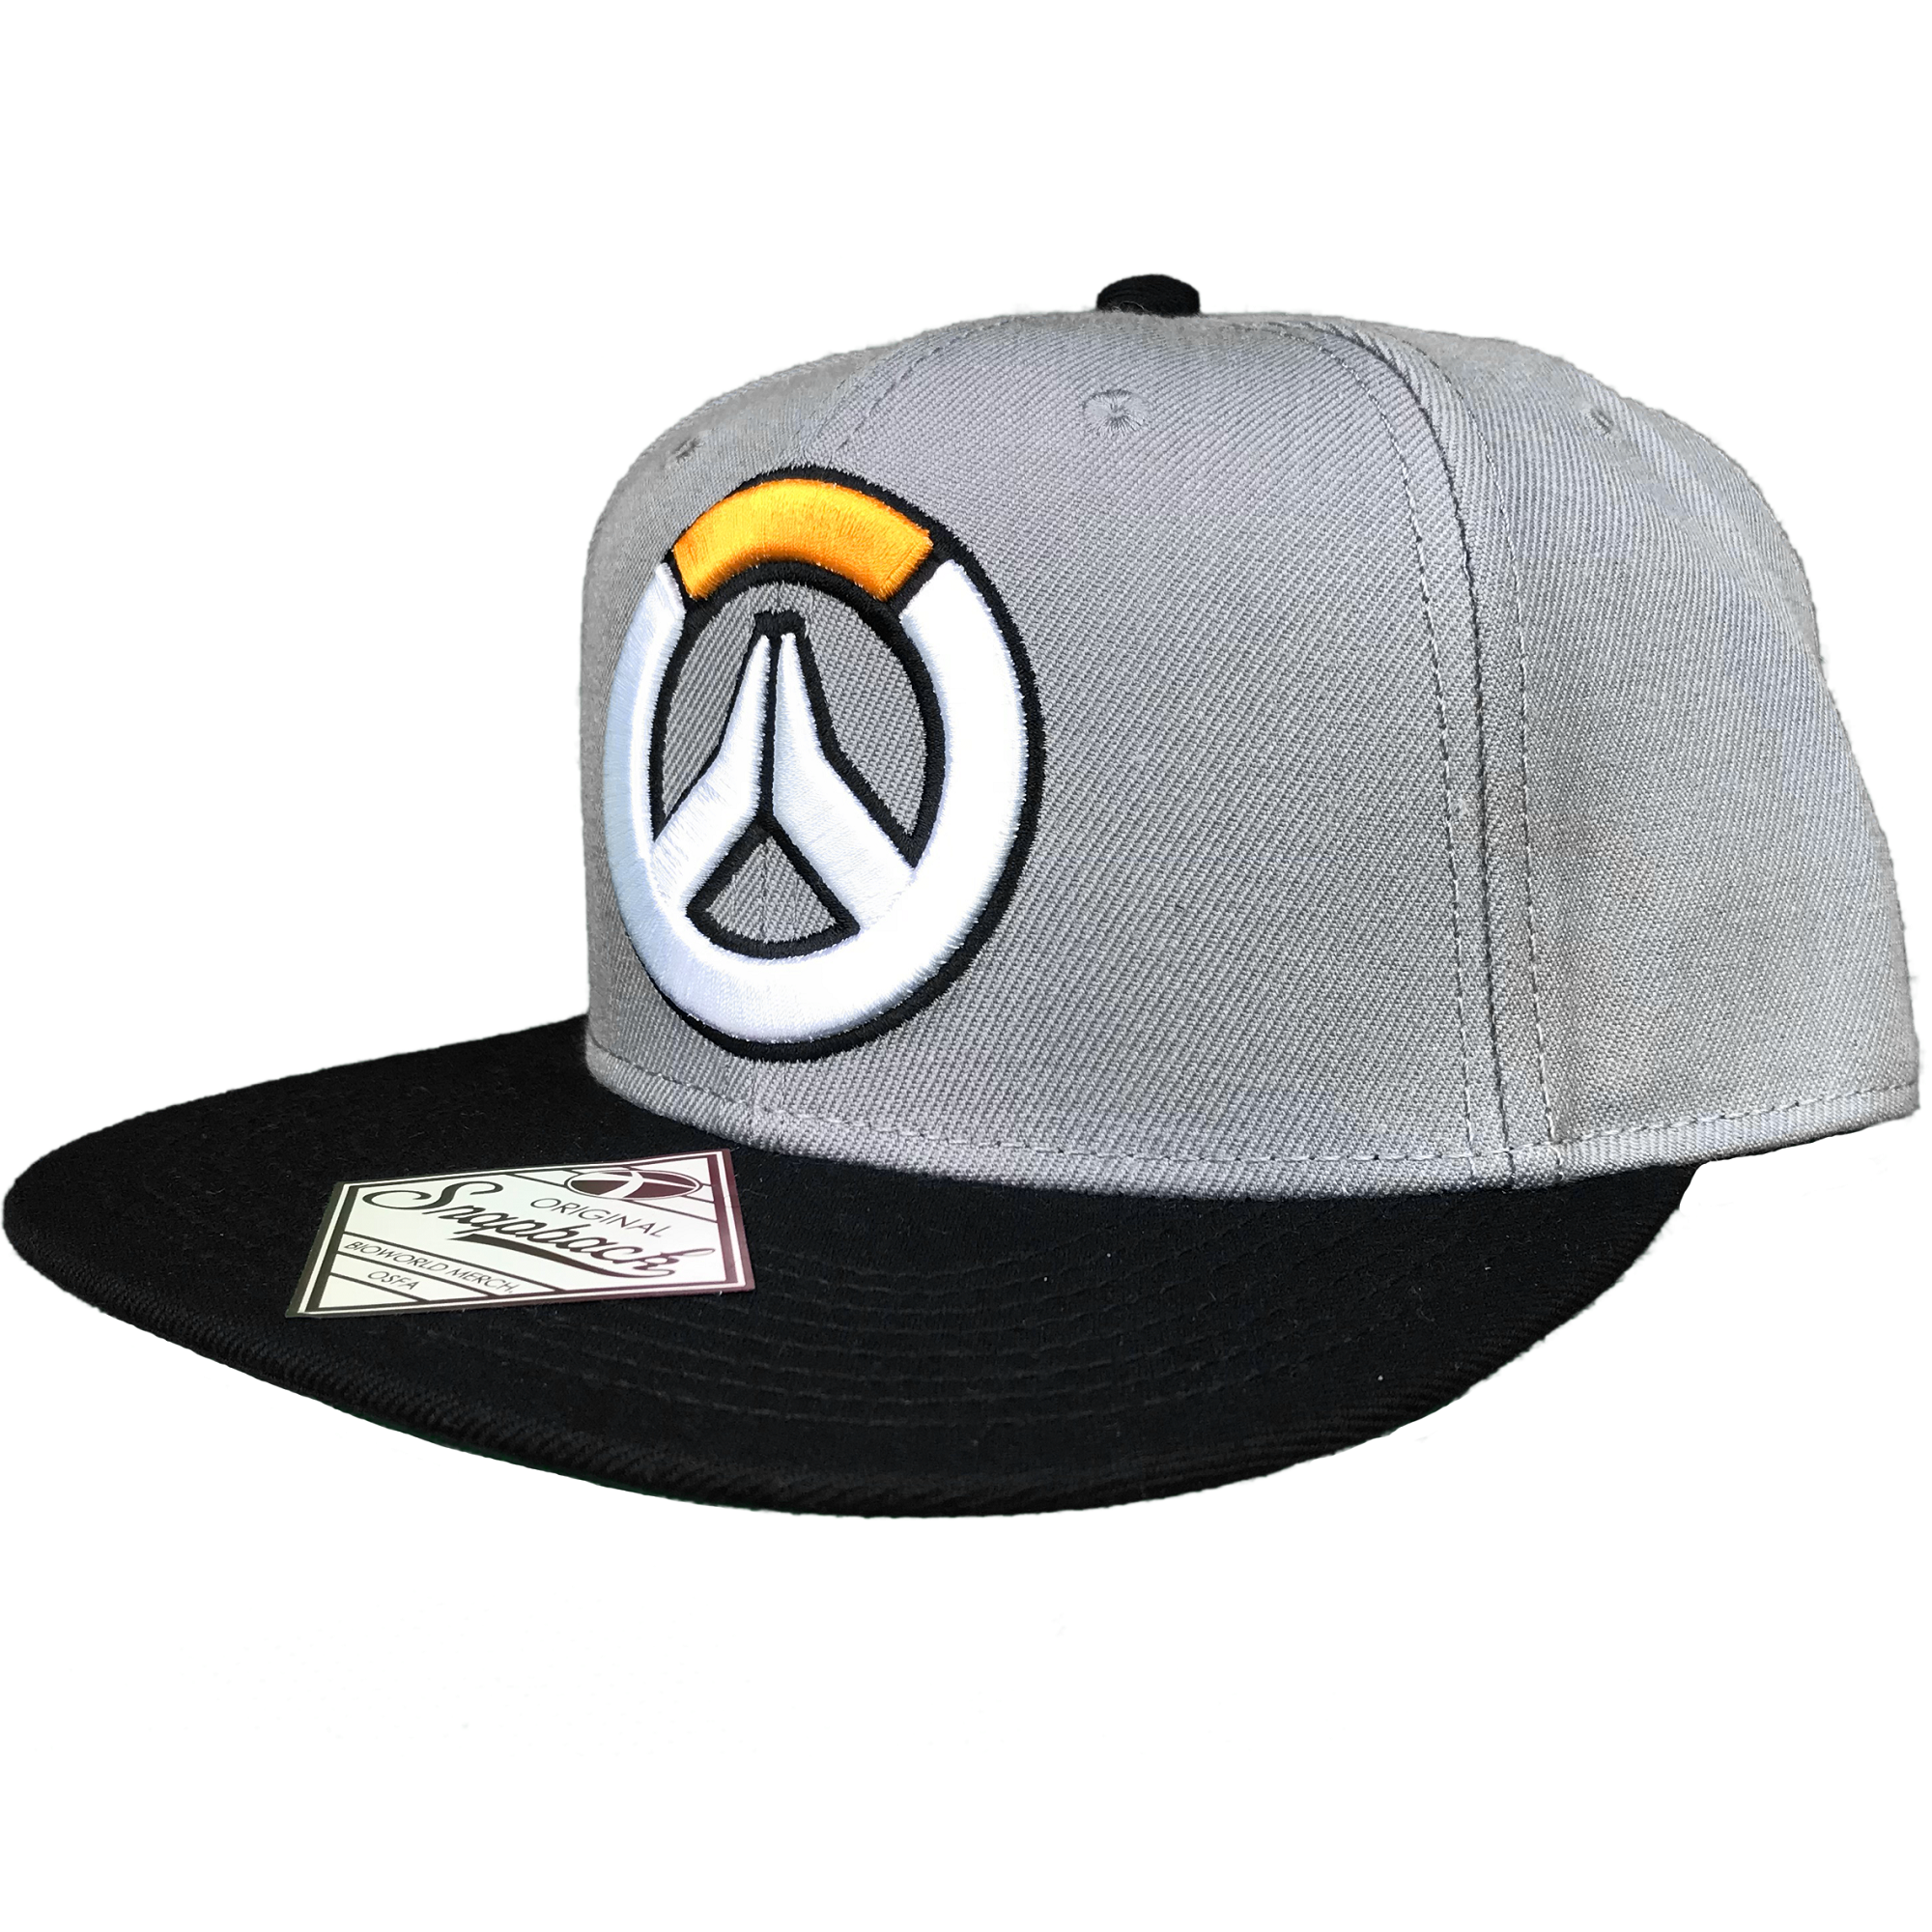 Overwatch Embroidered Logo Flat Bill Snapback Hat - Blue Culture Tees